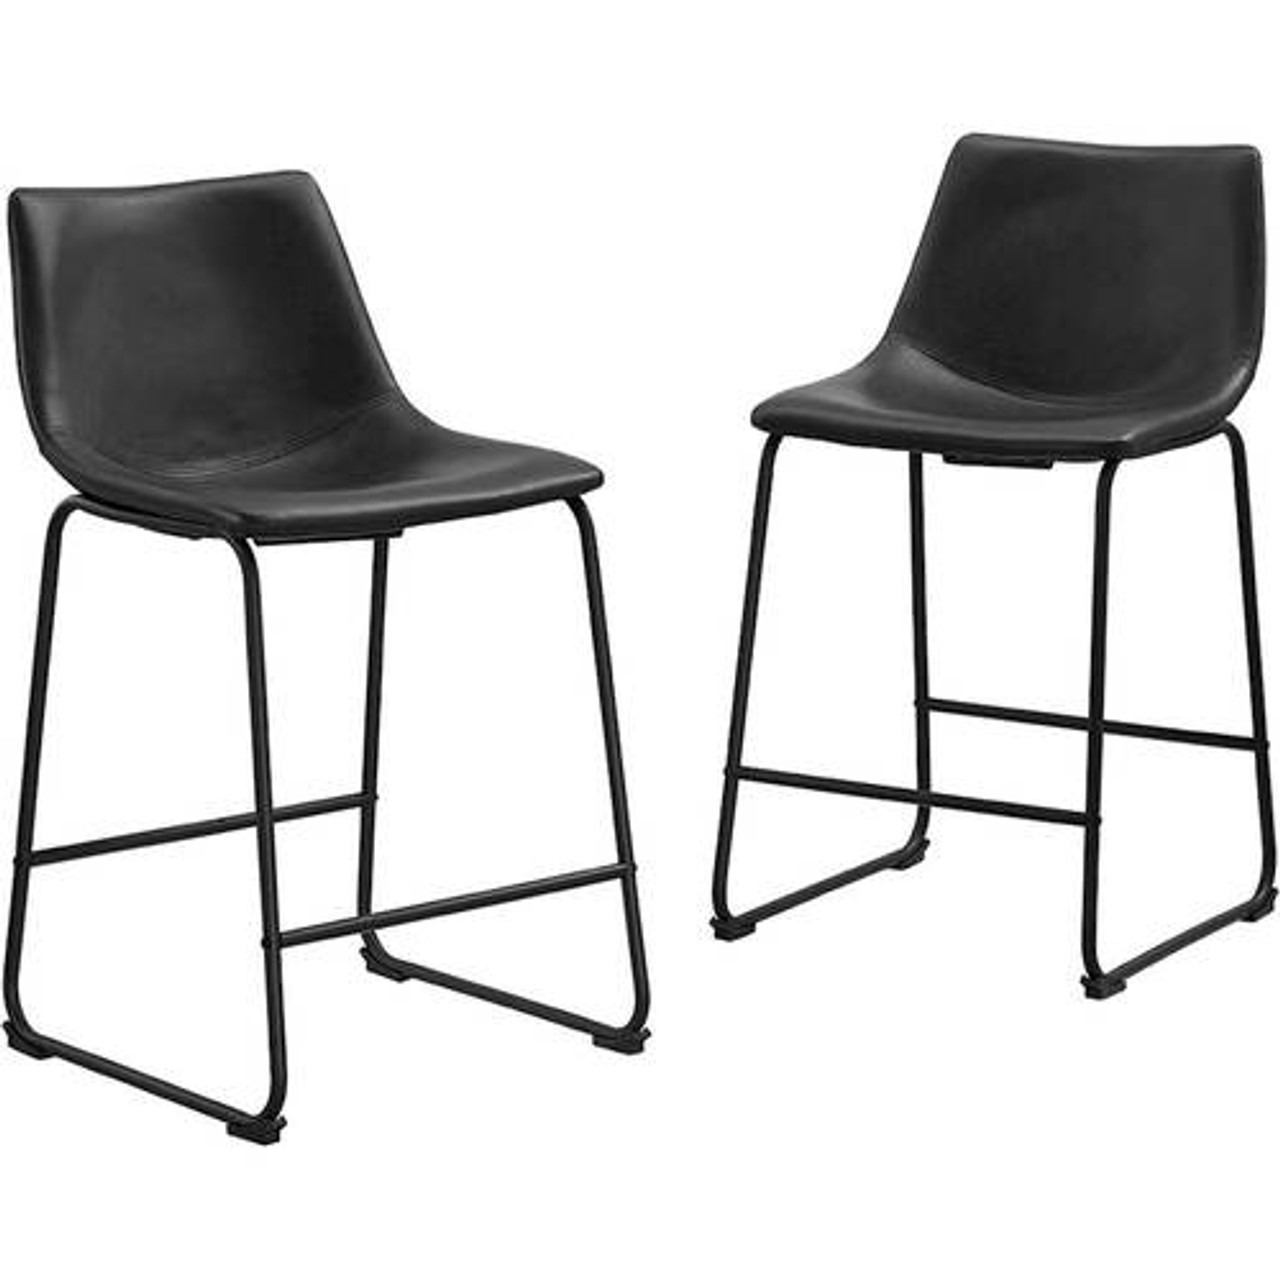 Walker Edison - Industrial Faux Leather Counter Stool (Set of 2) - Black